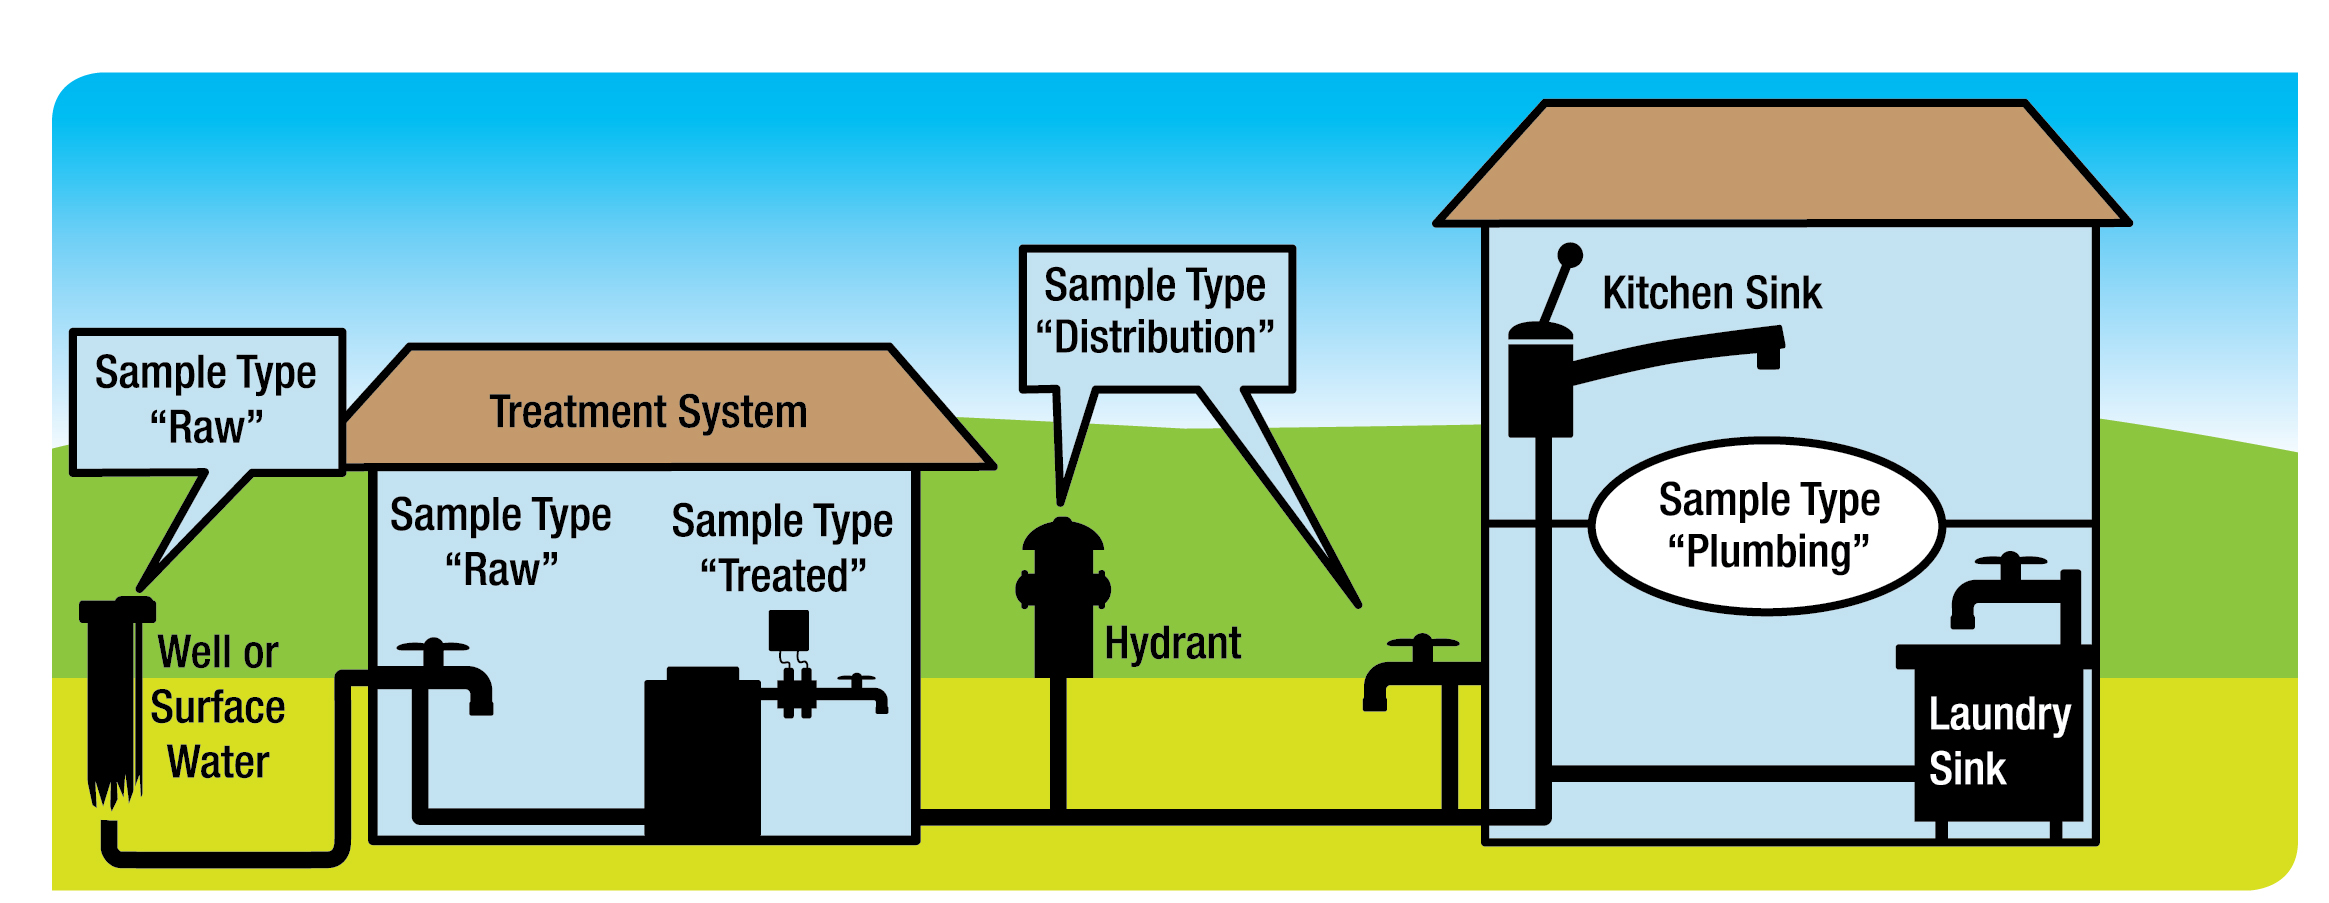 This is a picture which illustrates what a multi-building drinking water system with treatment and distribution/plumbing in separate buildings looks like. On the left hand side of the image is a well labelled sample type raw. To the right of the well is a small building which contains the treatment system. Within this building, the tap directly after treatment is labelled as sample type treated. There is a hydrant between the treatment building and another building. The hydrant is labelled as sample type distribution. The building connected to the hydrant has two sinks. It has a kitchen sink and a laundry sink. Each sink is labelled as sample type plumbing.